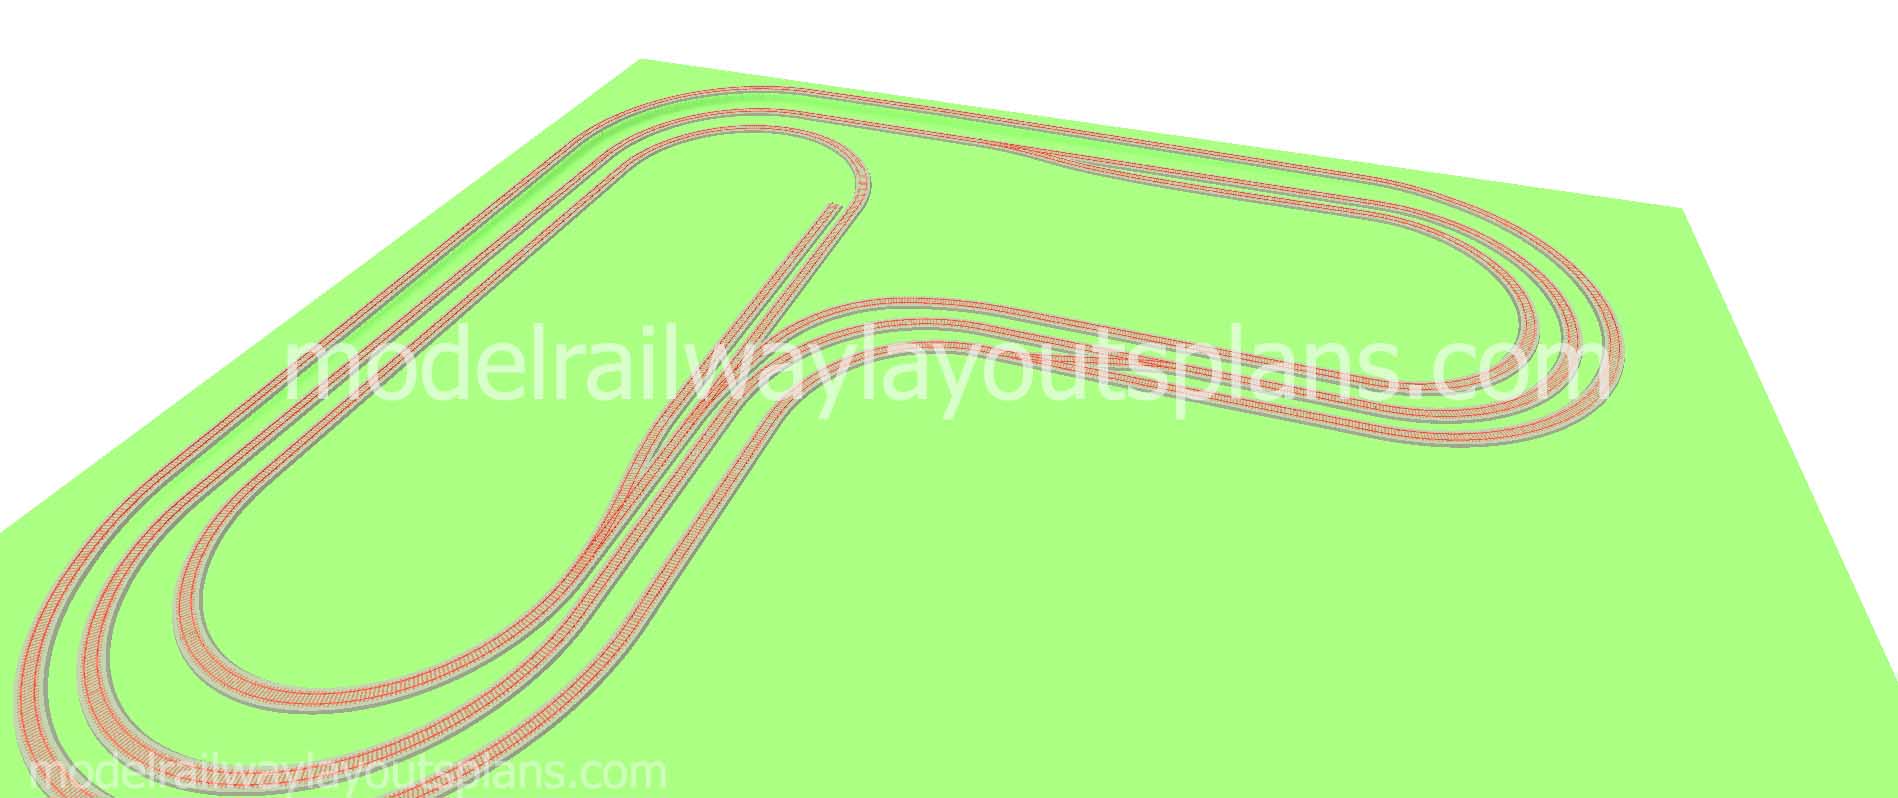 L shaped N scale layout track plan